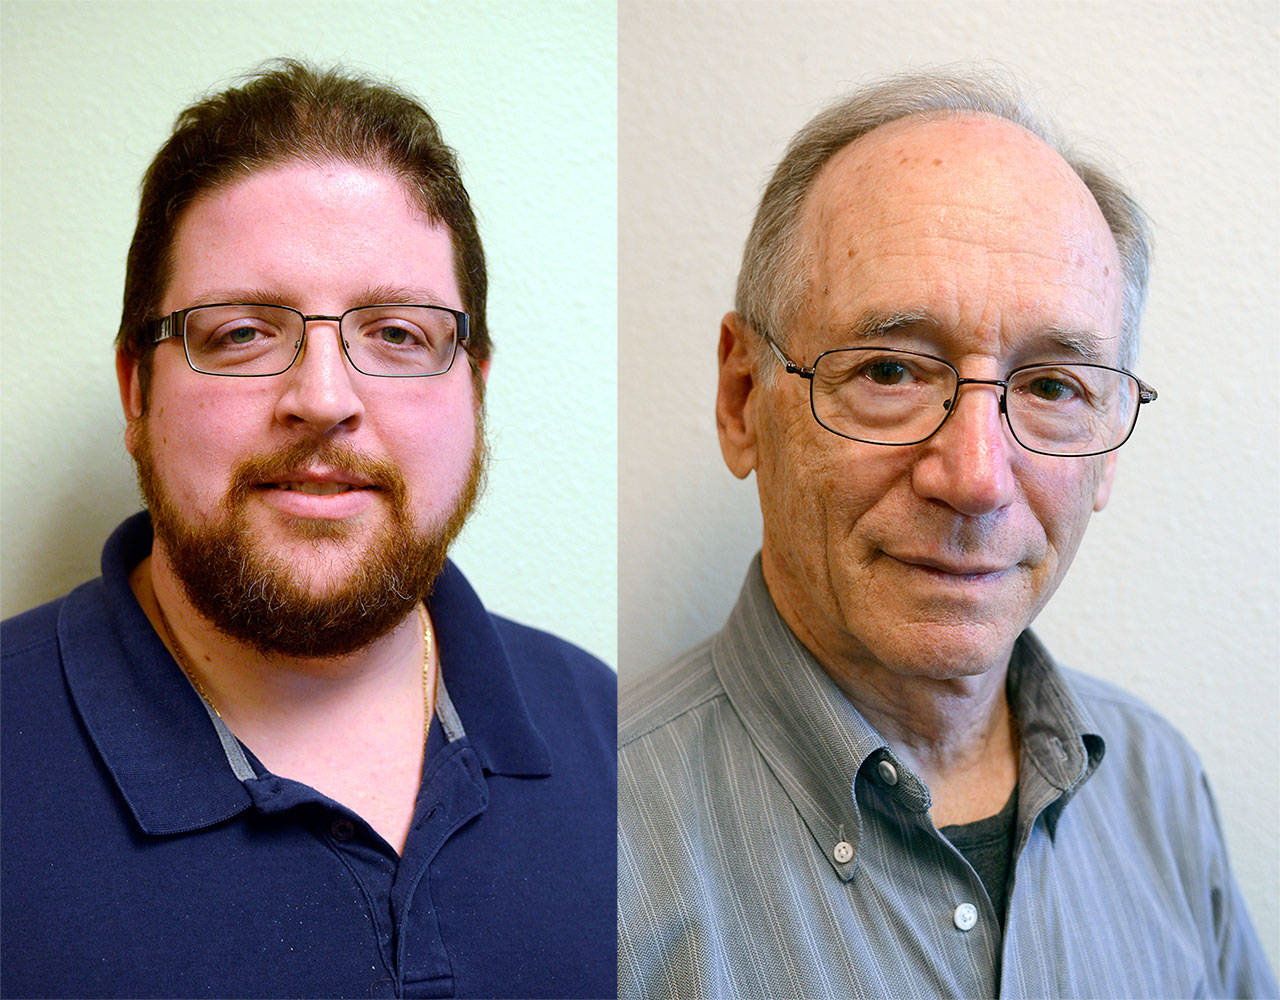 Justin Burnett / The Record — Thomas Gill (left) and Peter Morton (right) are running for position 5 on the Langley City Council.